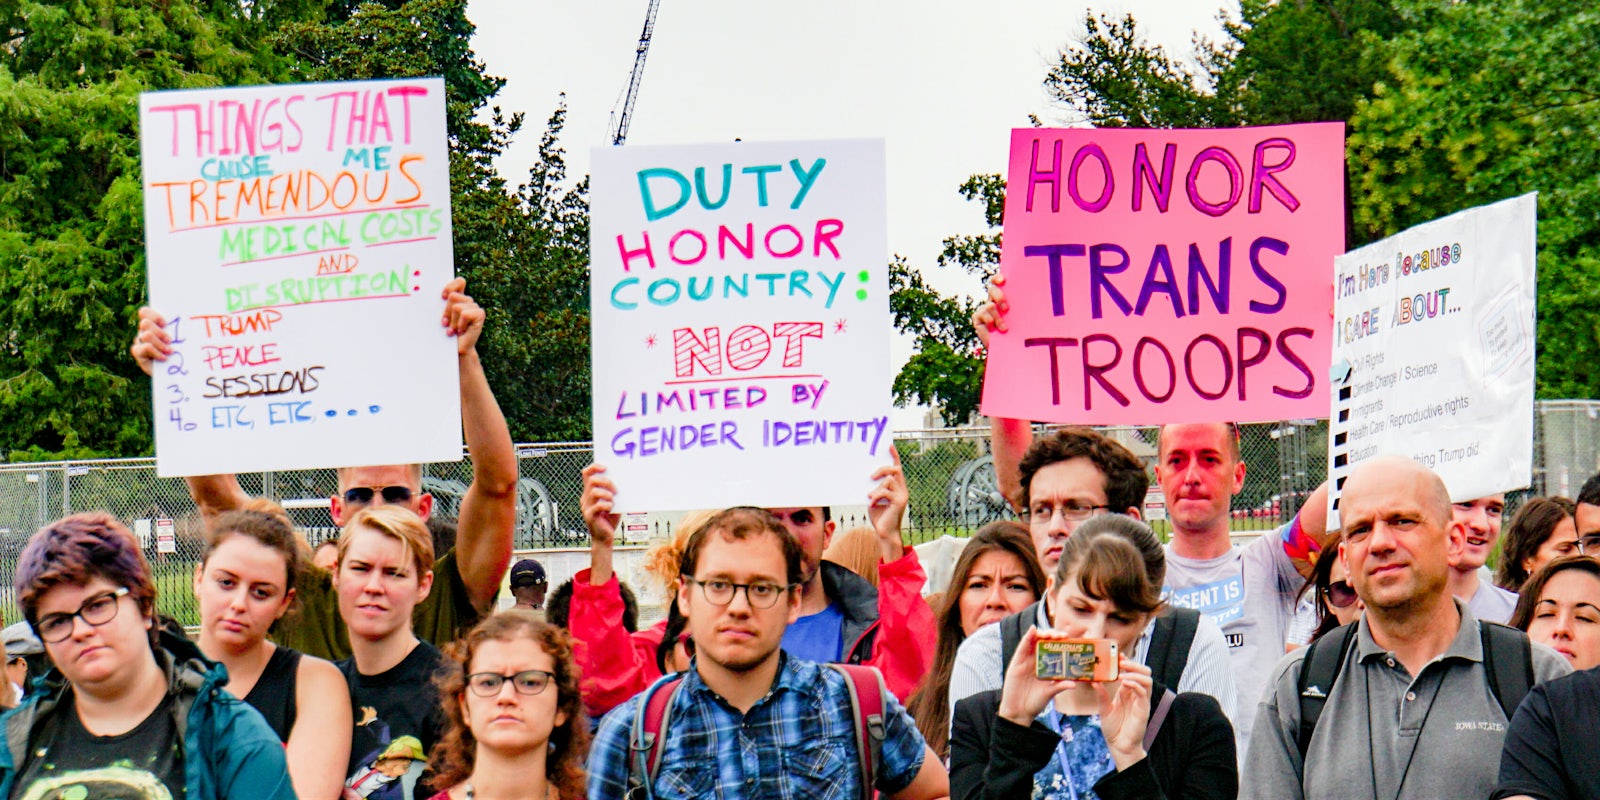 President Donald Trump's ban on trans troops was met with national protests.